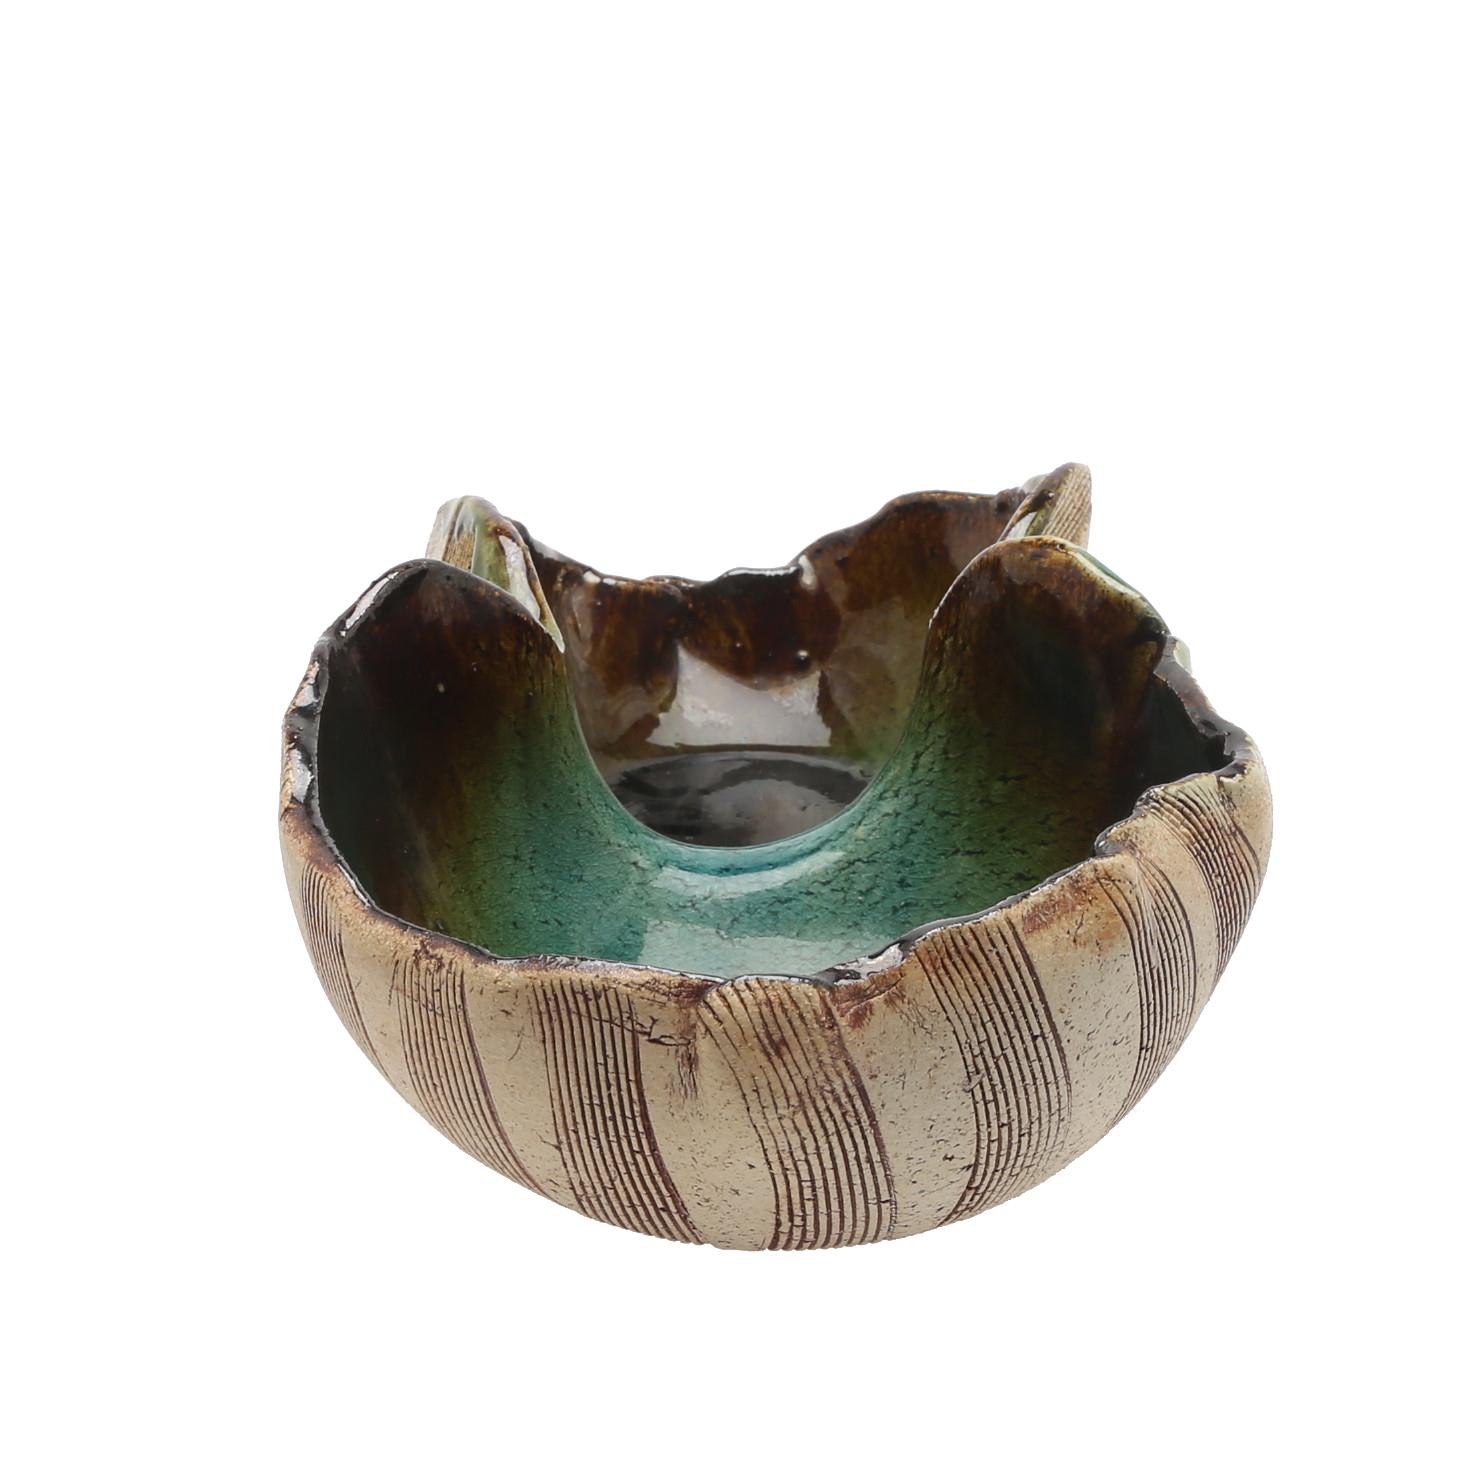 Scandinavian Modern Unusual Hand Built Double Bowl by Artist Bengt Berglund In Good Condition For Sale In Stockholm, SE